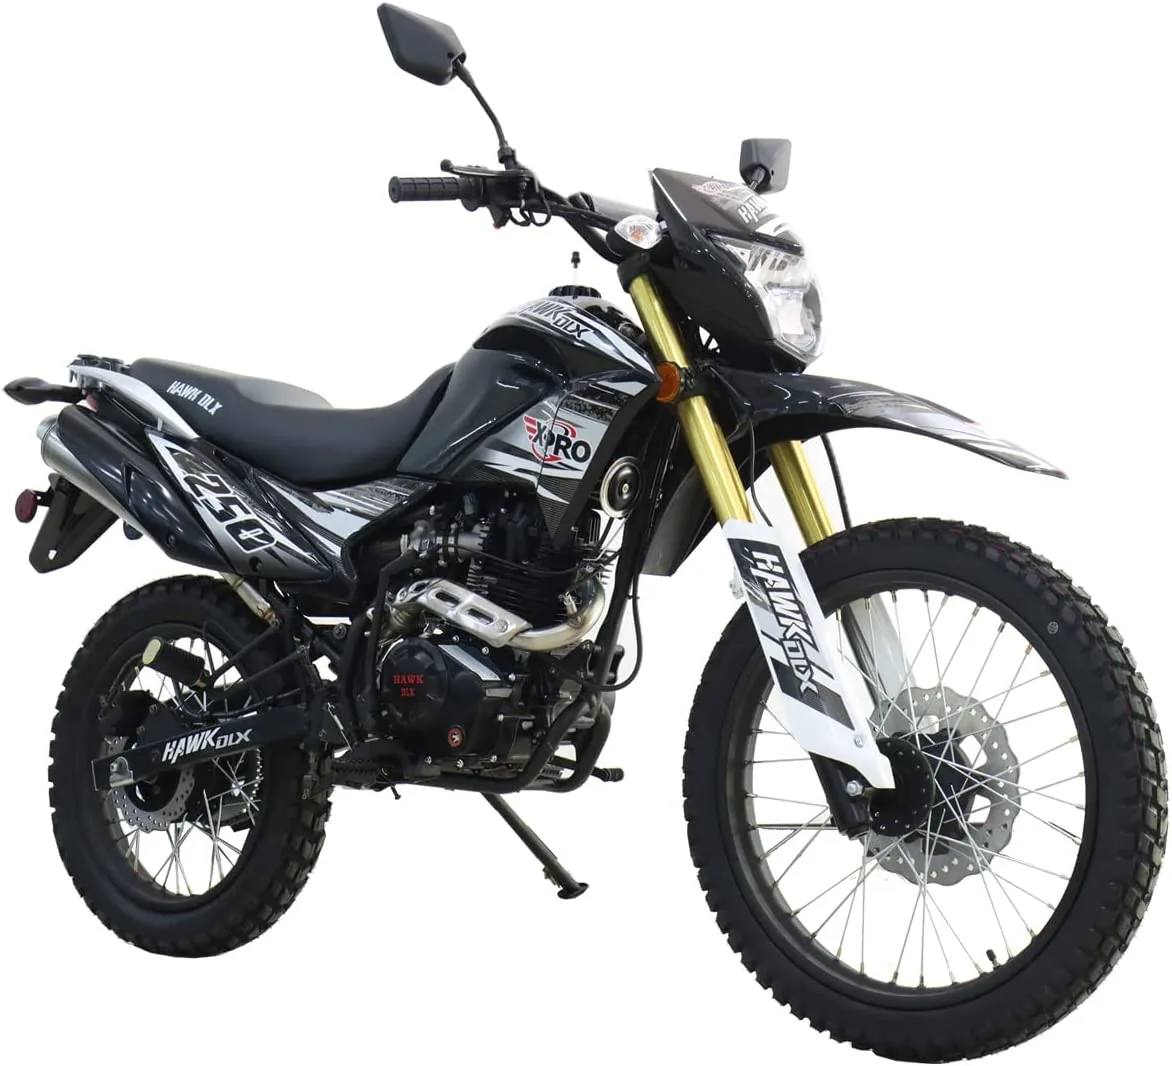 X Pro Hawk DLX 250 Street Legal Dirt Bike Best Dual Sport Motorcycle Based On YOUR Needs [2024]